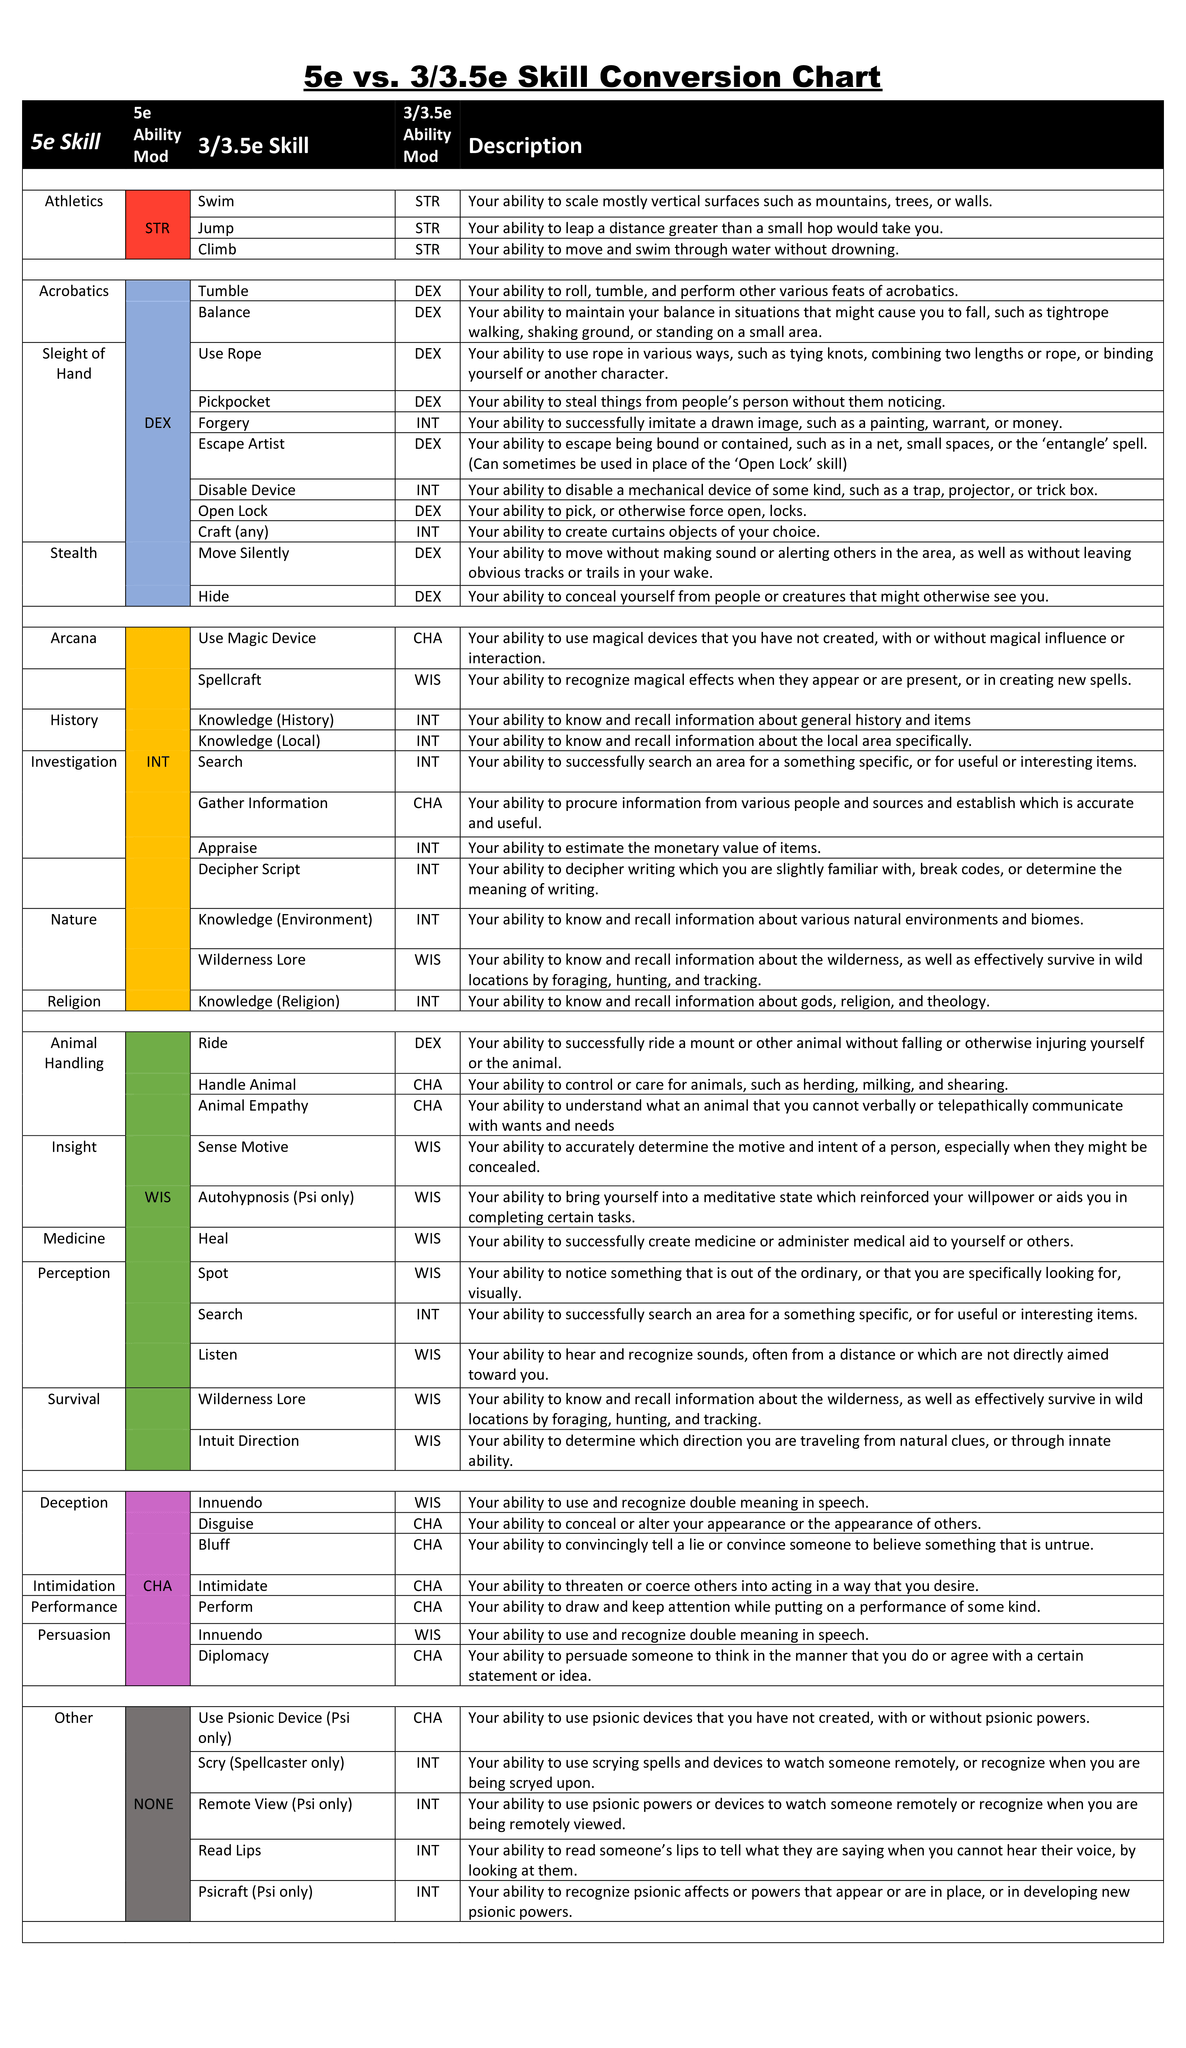 Image Description: a chart sorting 3e and 5e skills by their relation to each other, their associated ability modifiers, and their descriptions. 